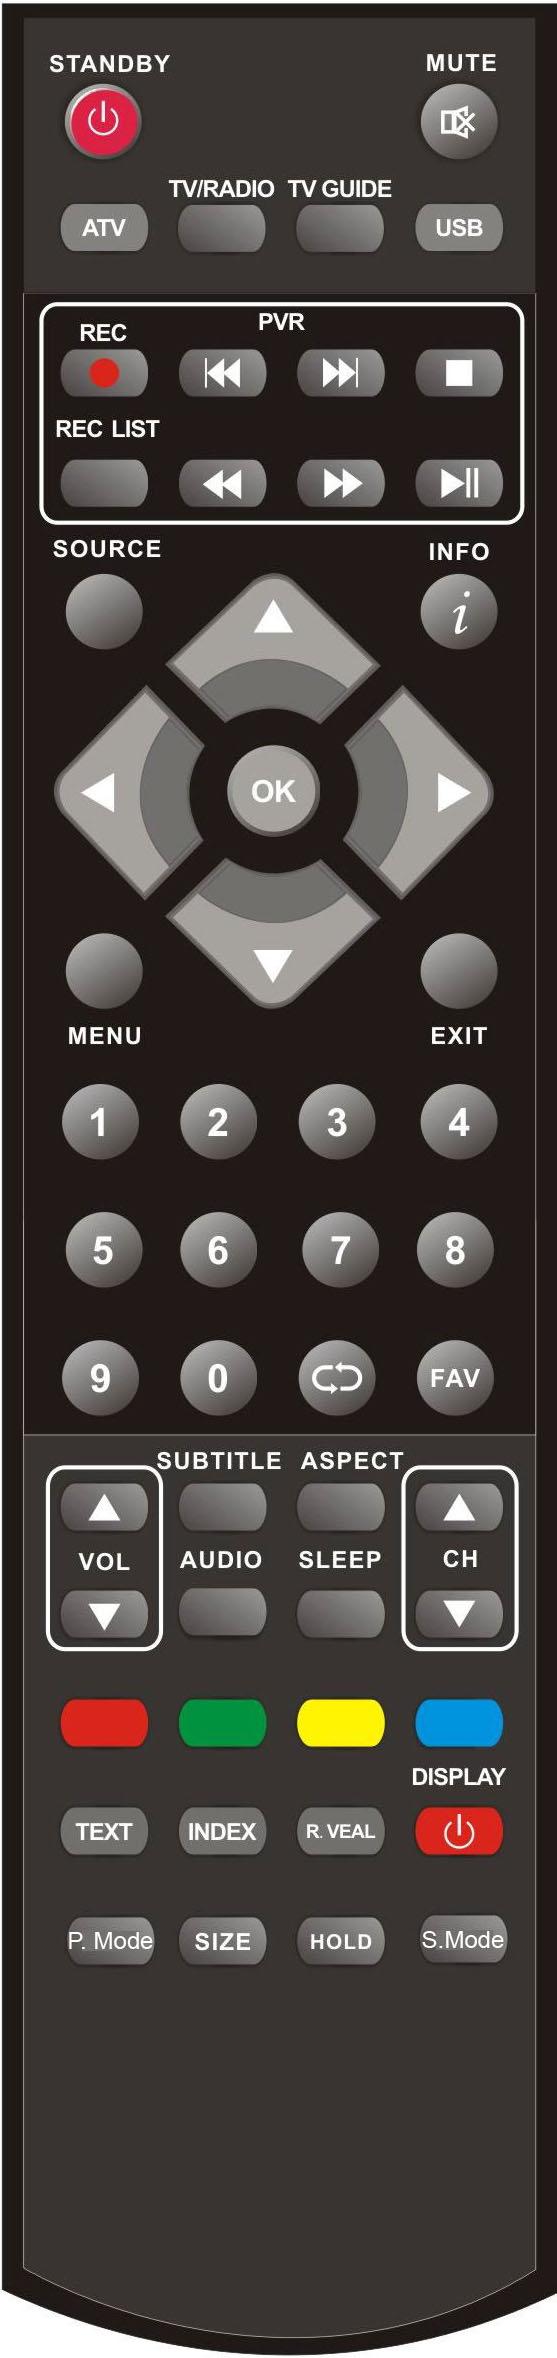 User Guide REMOTE CONTROL STANDBY - Switch on TV when on standby or vice versa MUTE - Mute the sound or vice versa ATV - Switch to analogue TV source TV/RADIO - Switch to Freeview and switch between